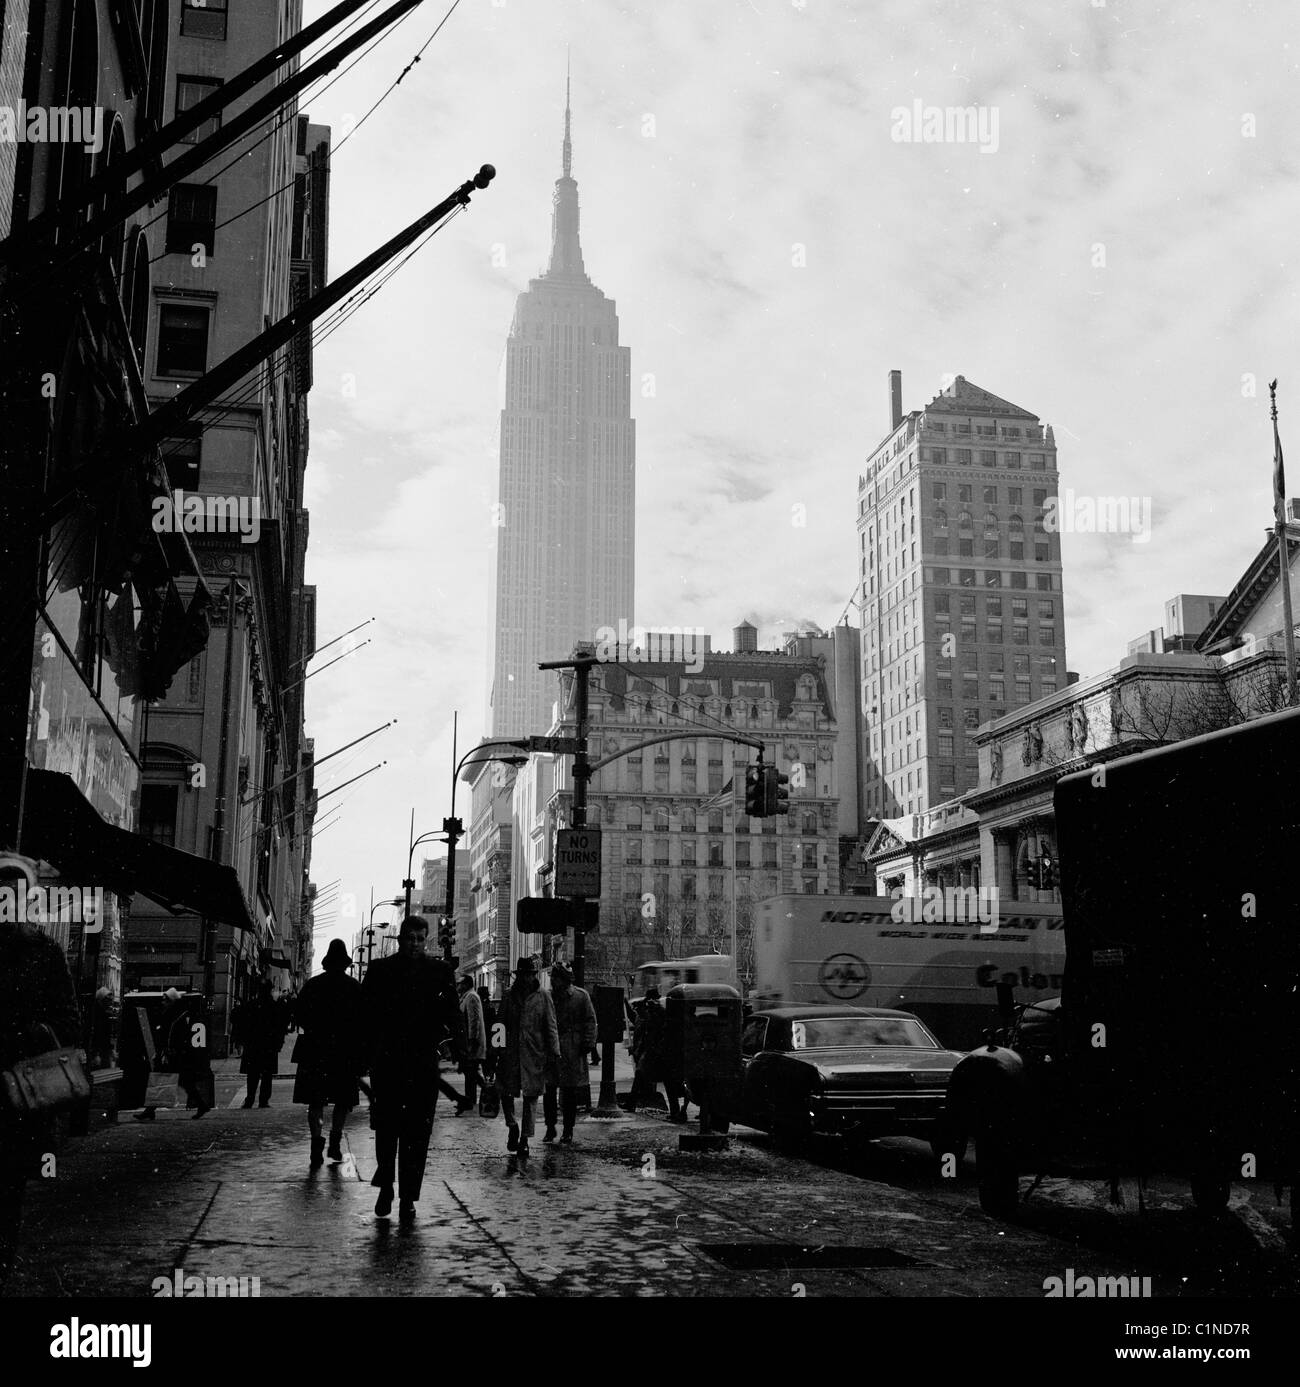 New York City Prints Black and White: Midtown Manhattan and Times